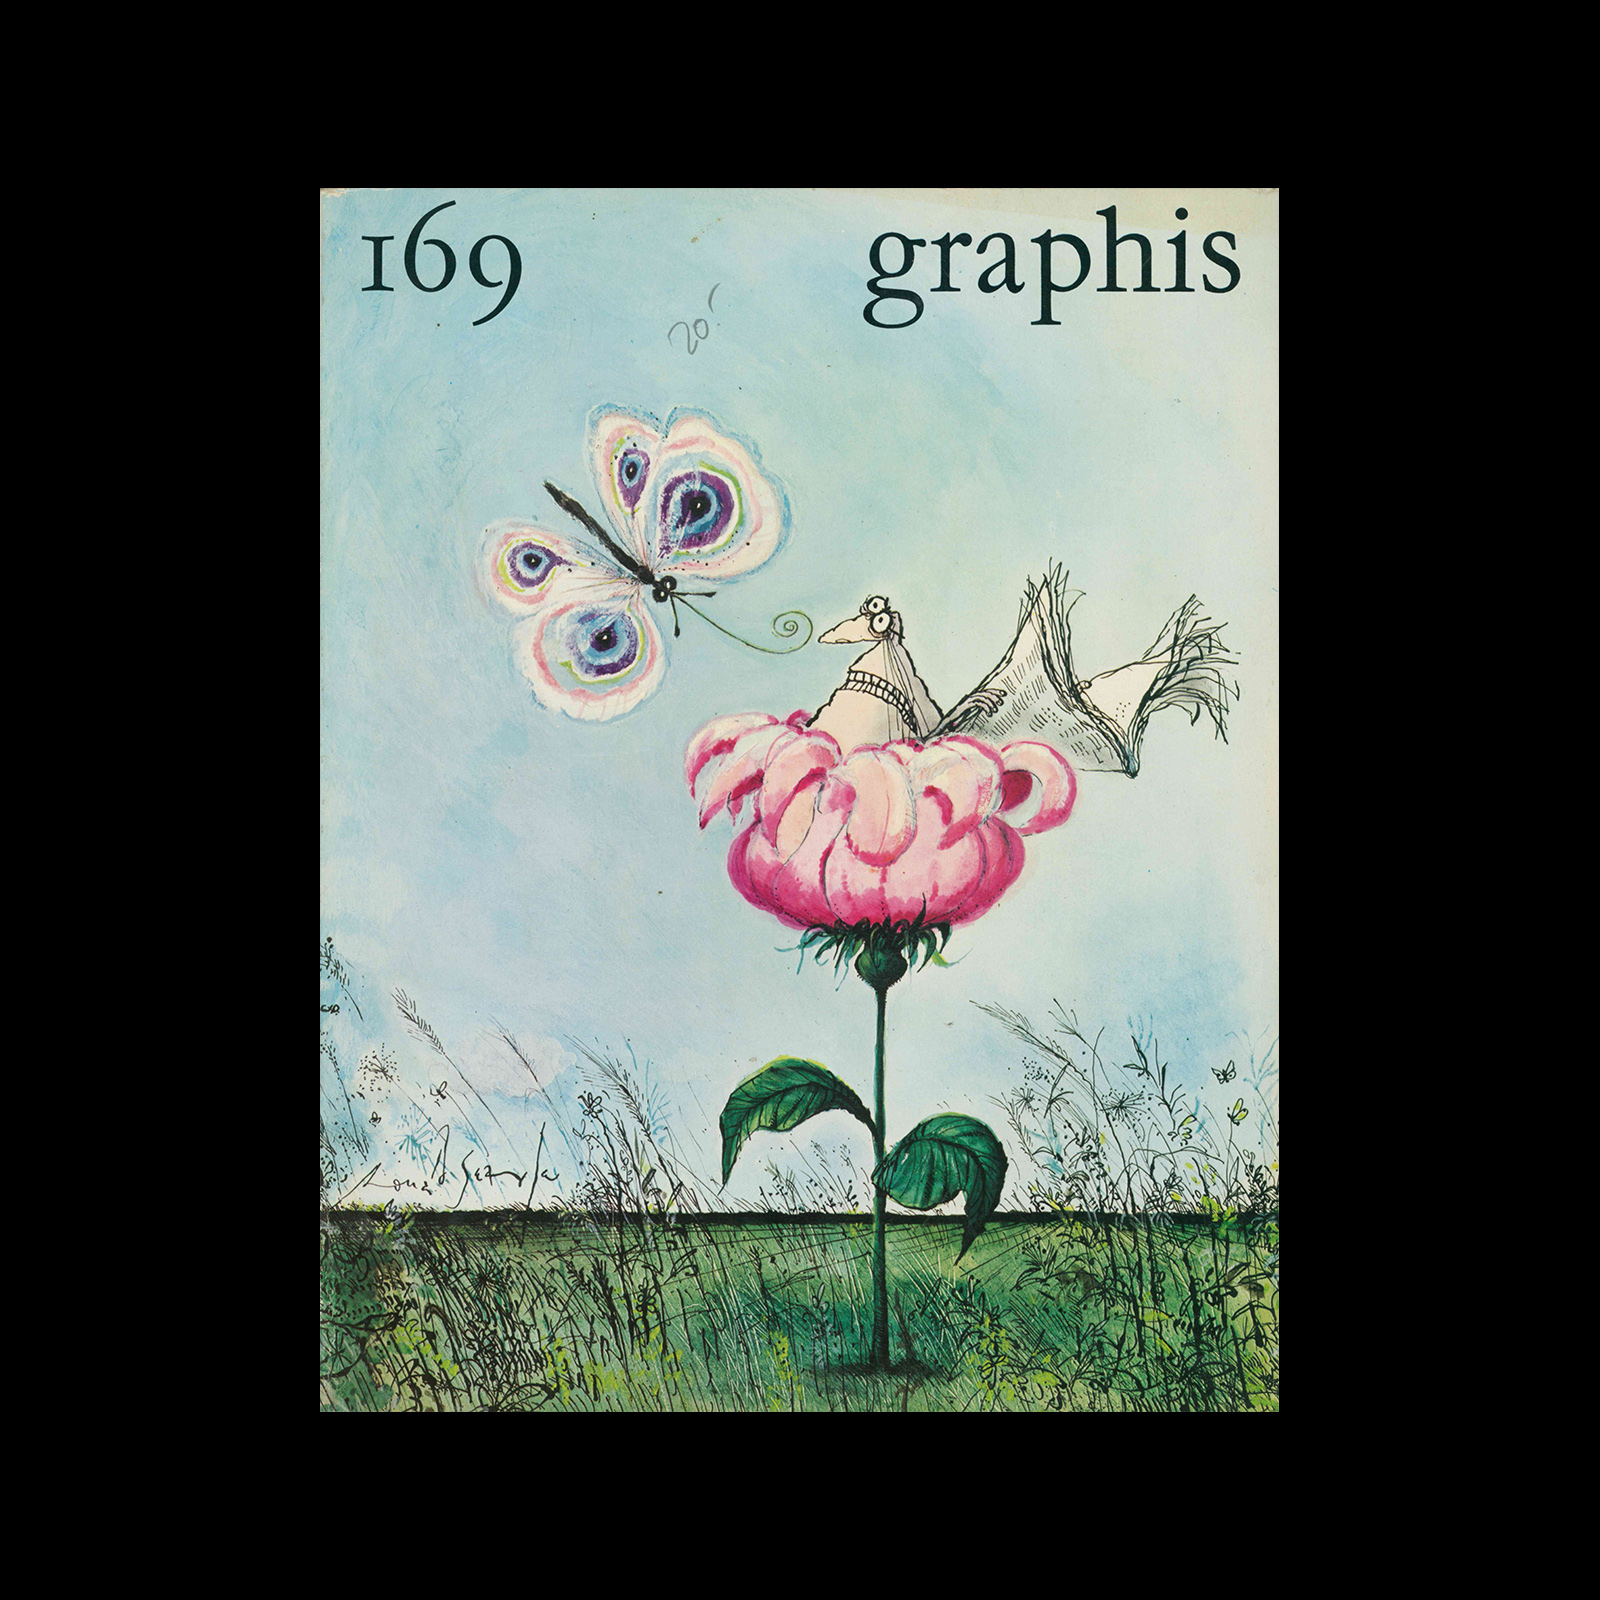 Graphis 169, 1973. Cover design by Ronald Searle.